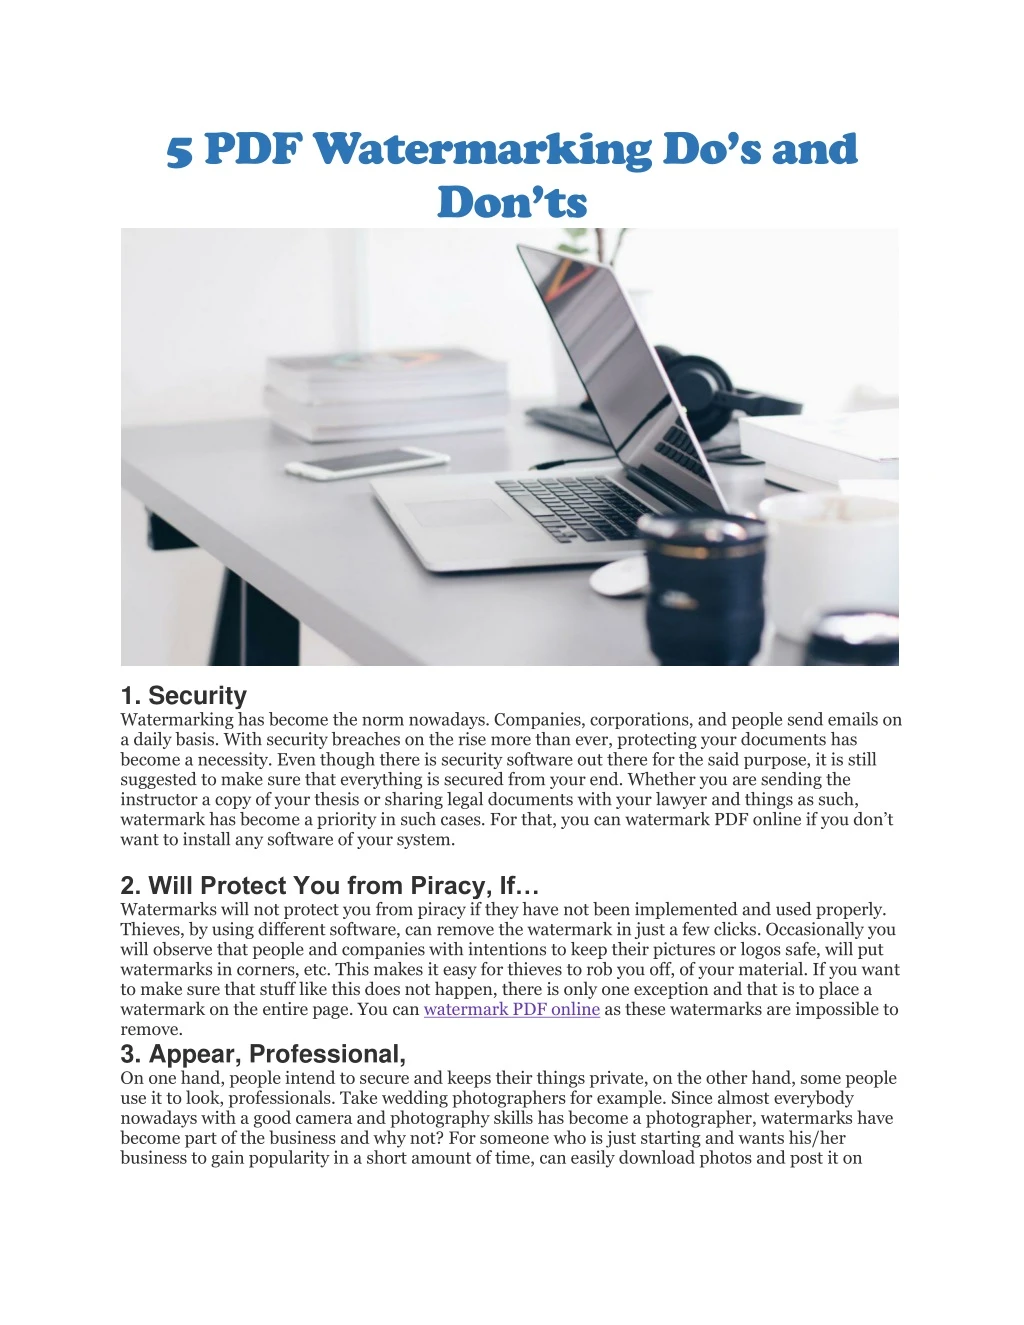 5 pdf watermarking do s and don ts